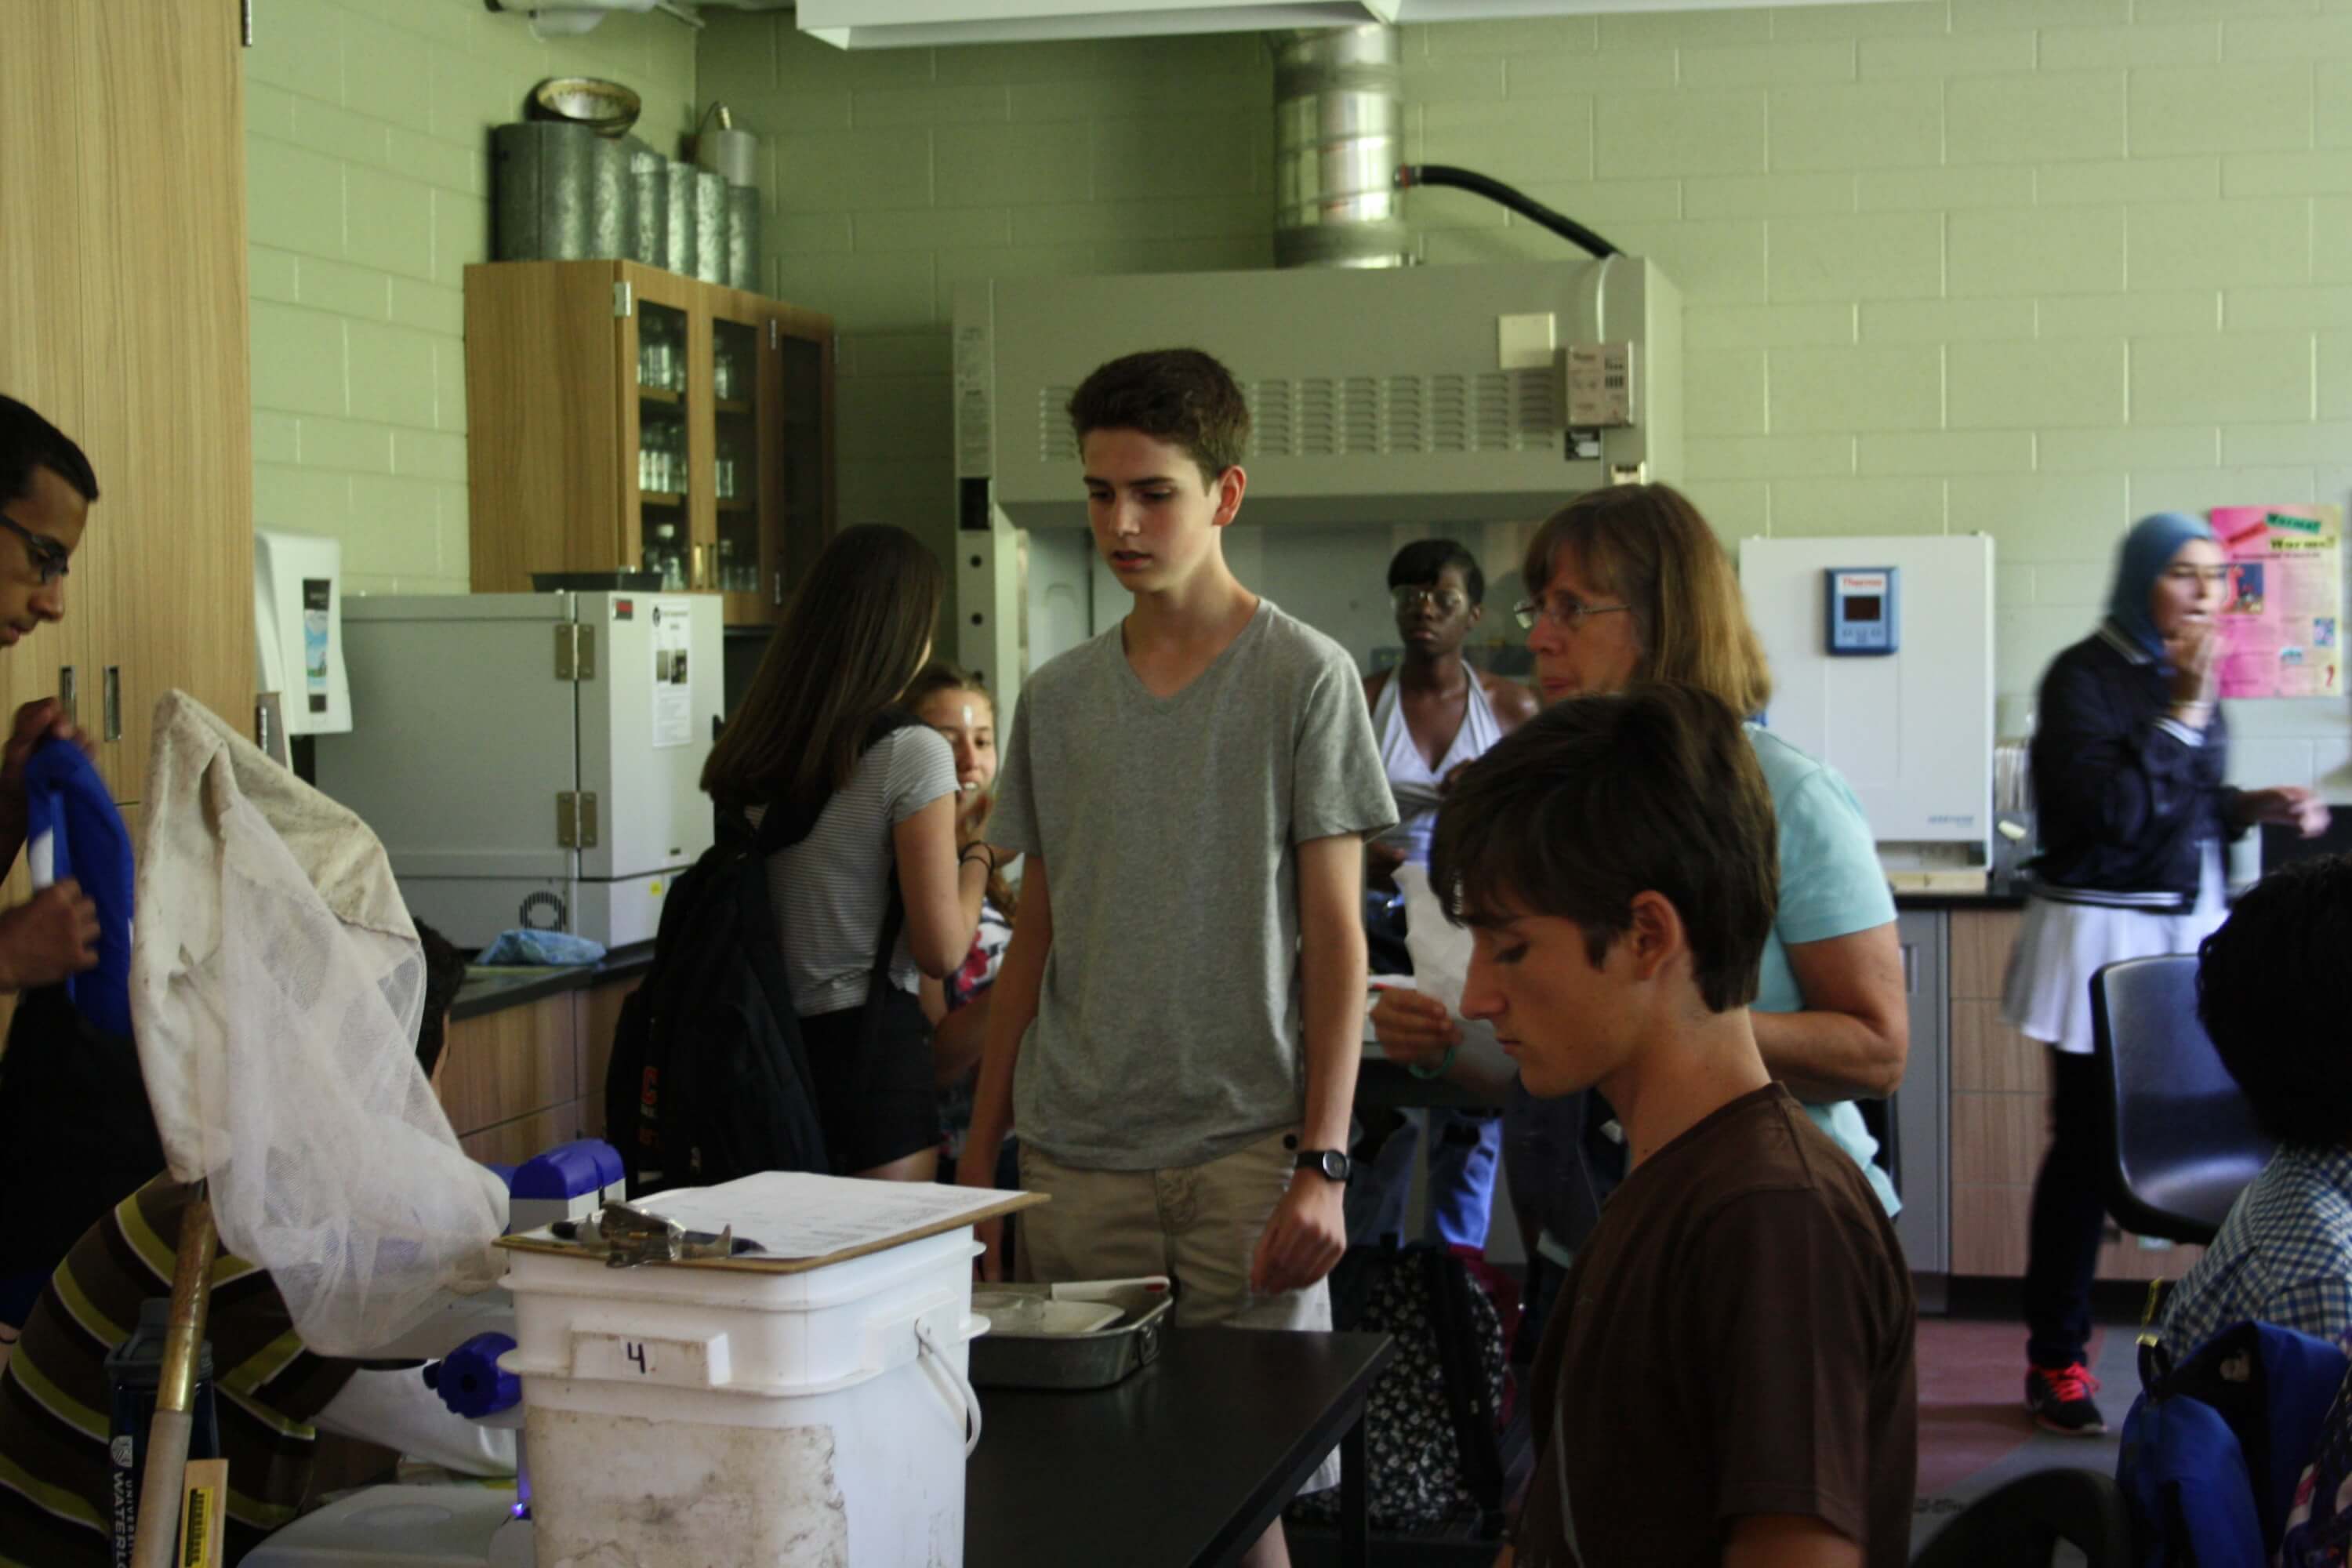 Students getting ready to exit the lab